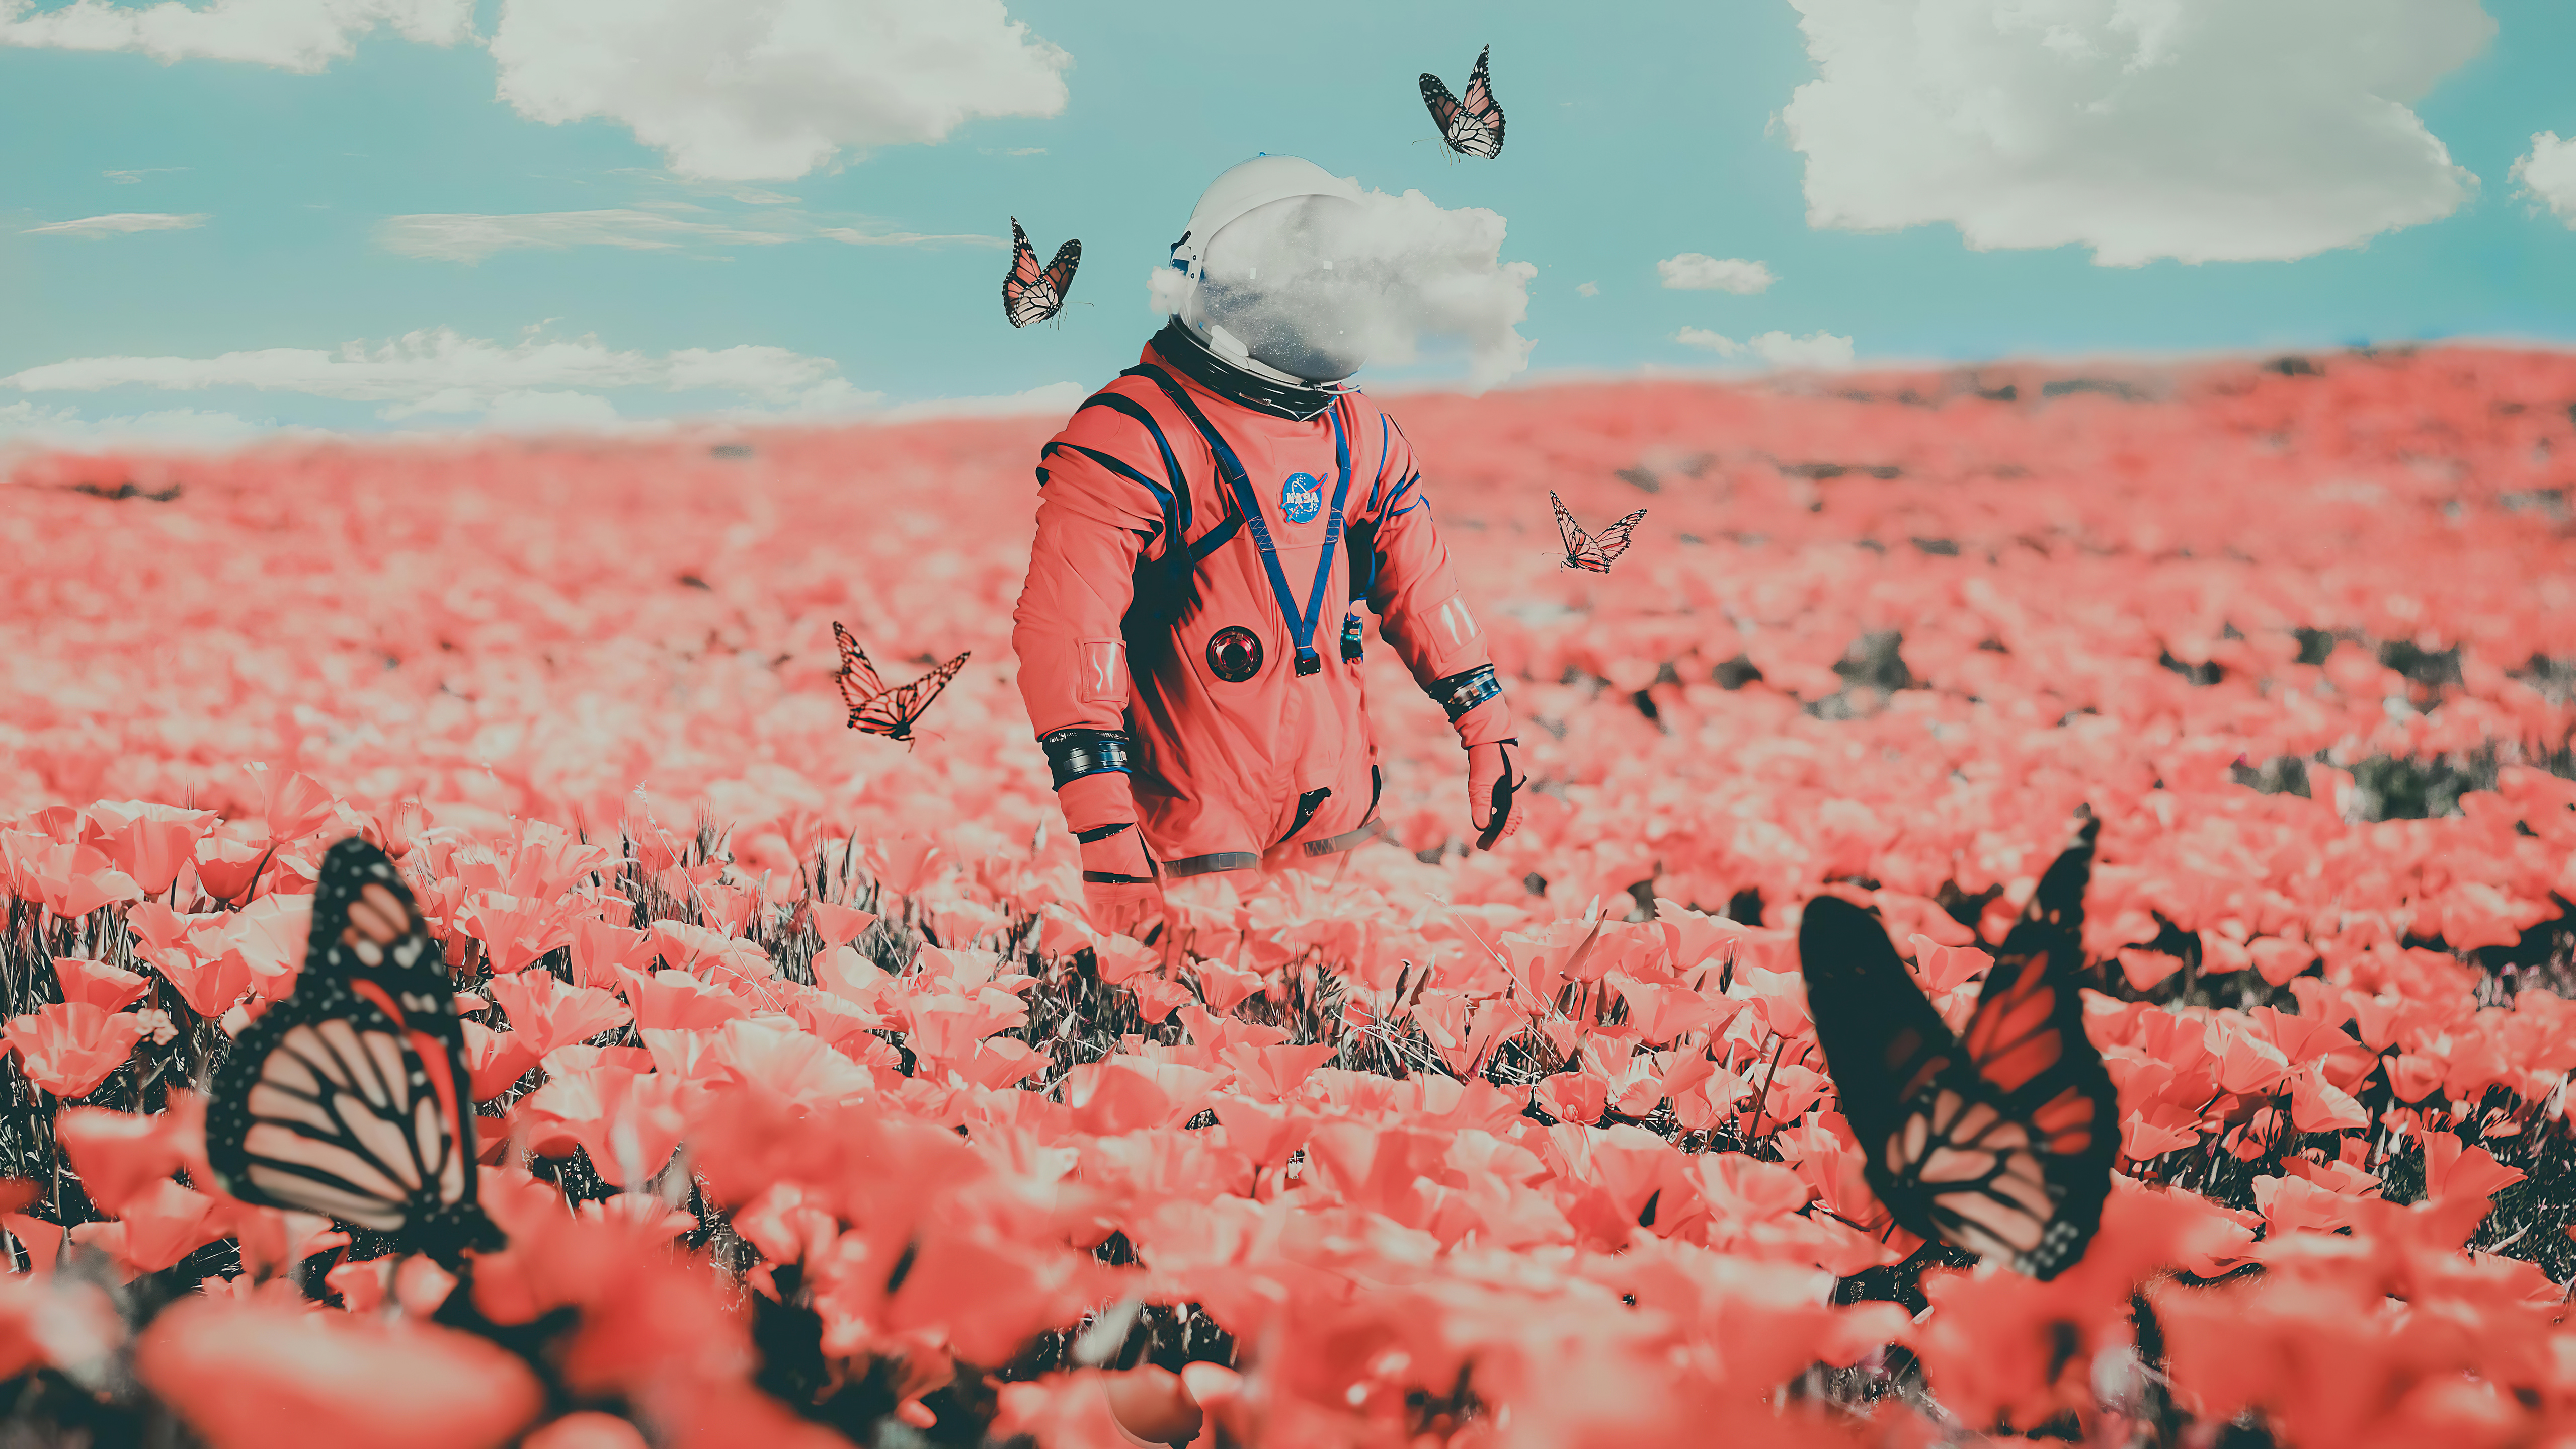 Astronaut on the field with pink flowers and butterflies